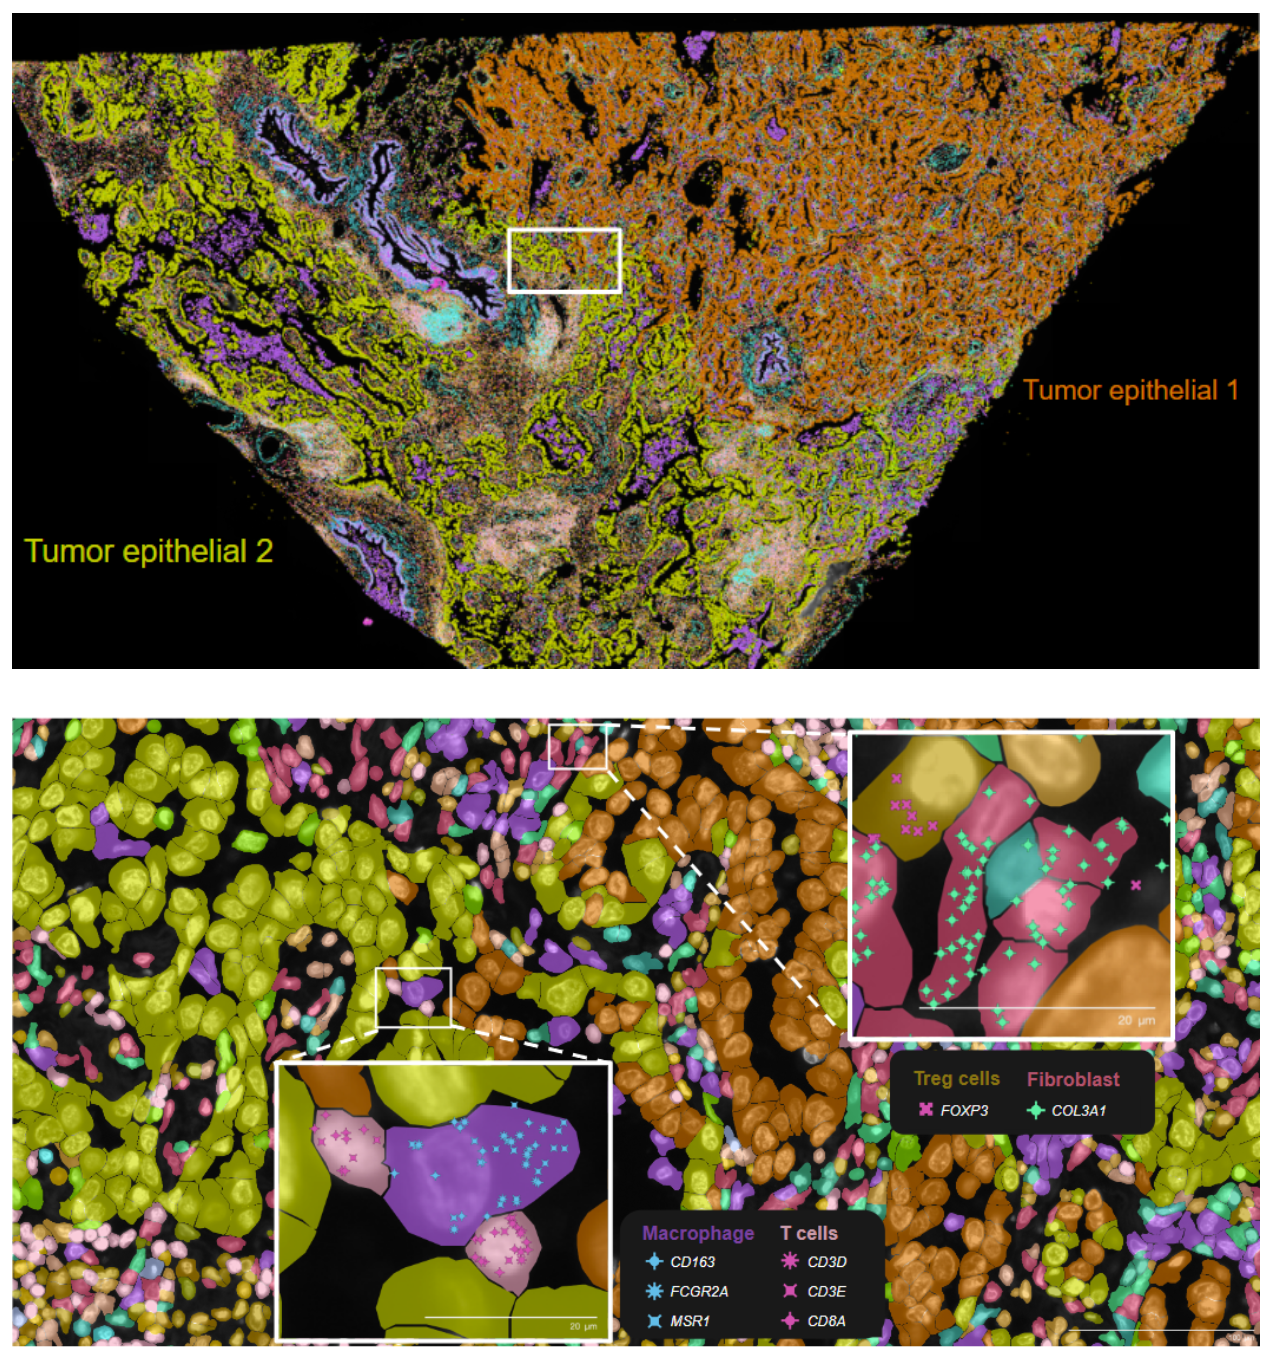 Figure 2. Xenium Explorer analysis of human lung adenocarcinoma. An image of a section of human lung adenocarcinoma is shown in the top panel, with Xenium Explorer zoomed in (bottom panel) to segmented cells and selected transcripts associated with immune cell types localized within individual cells.